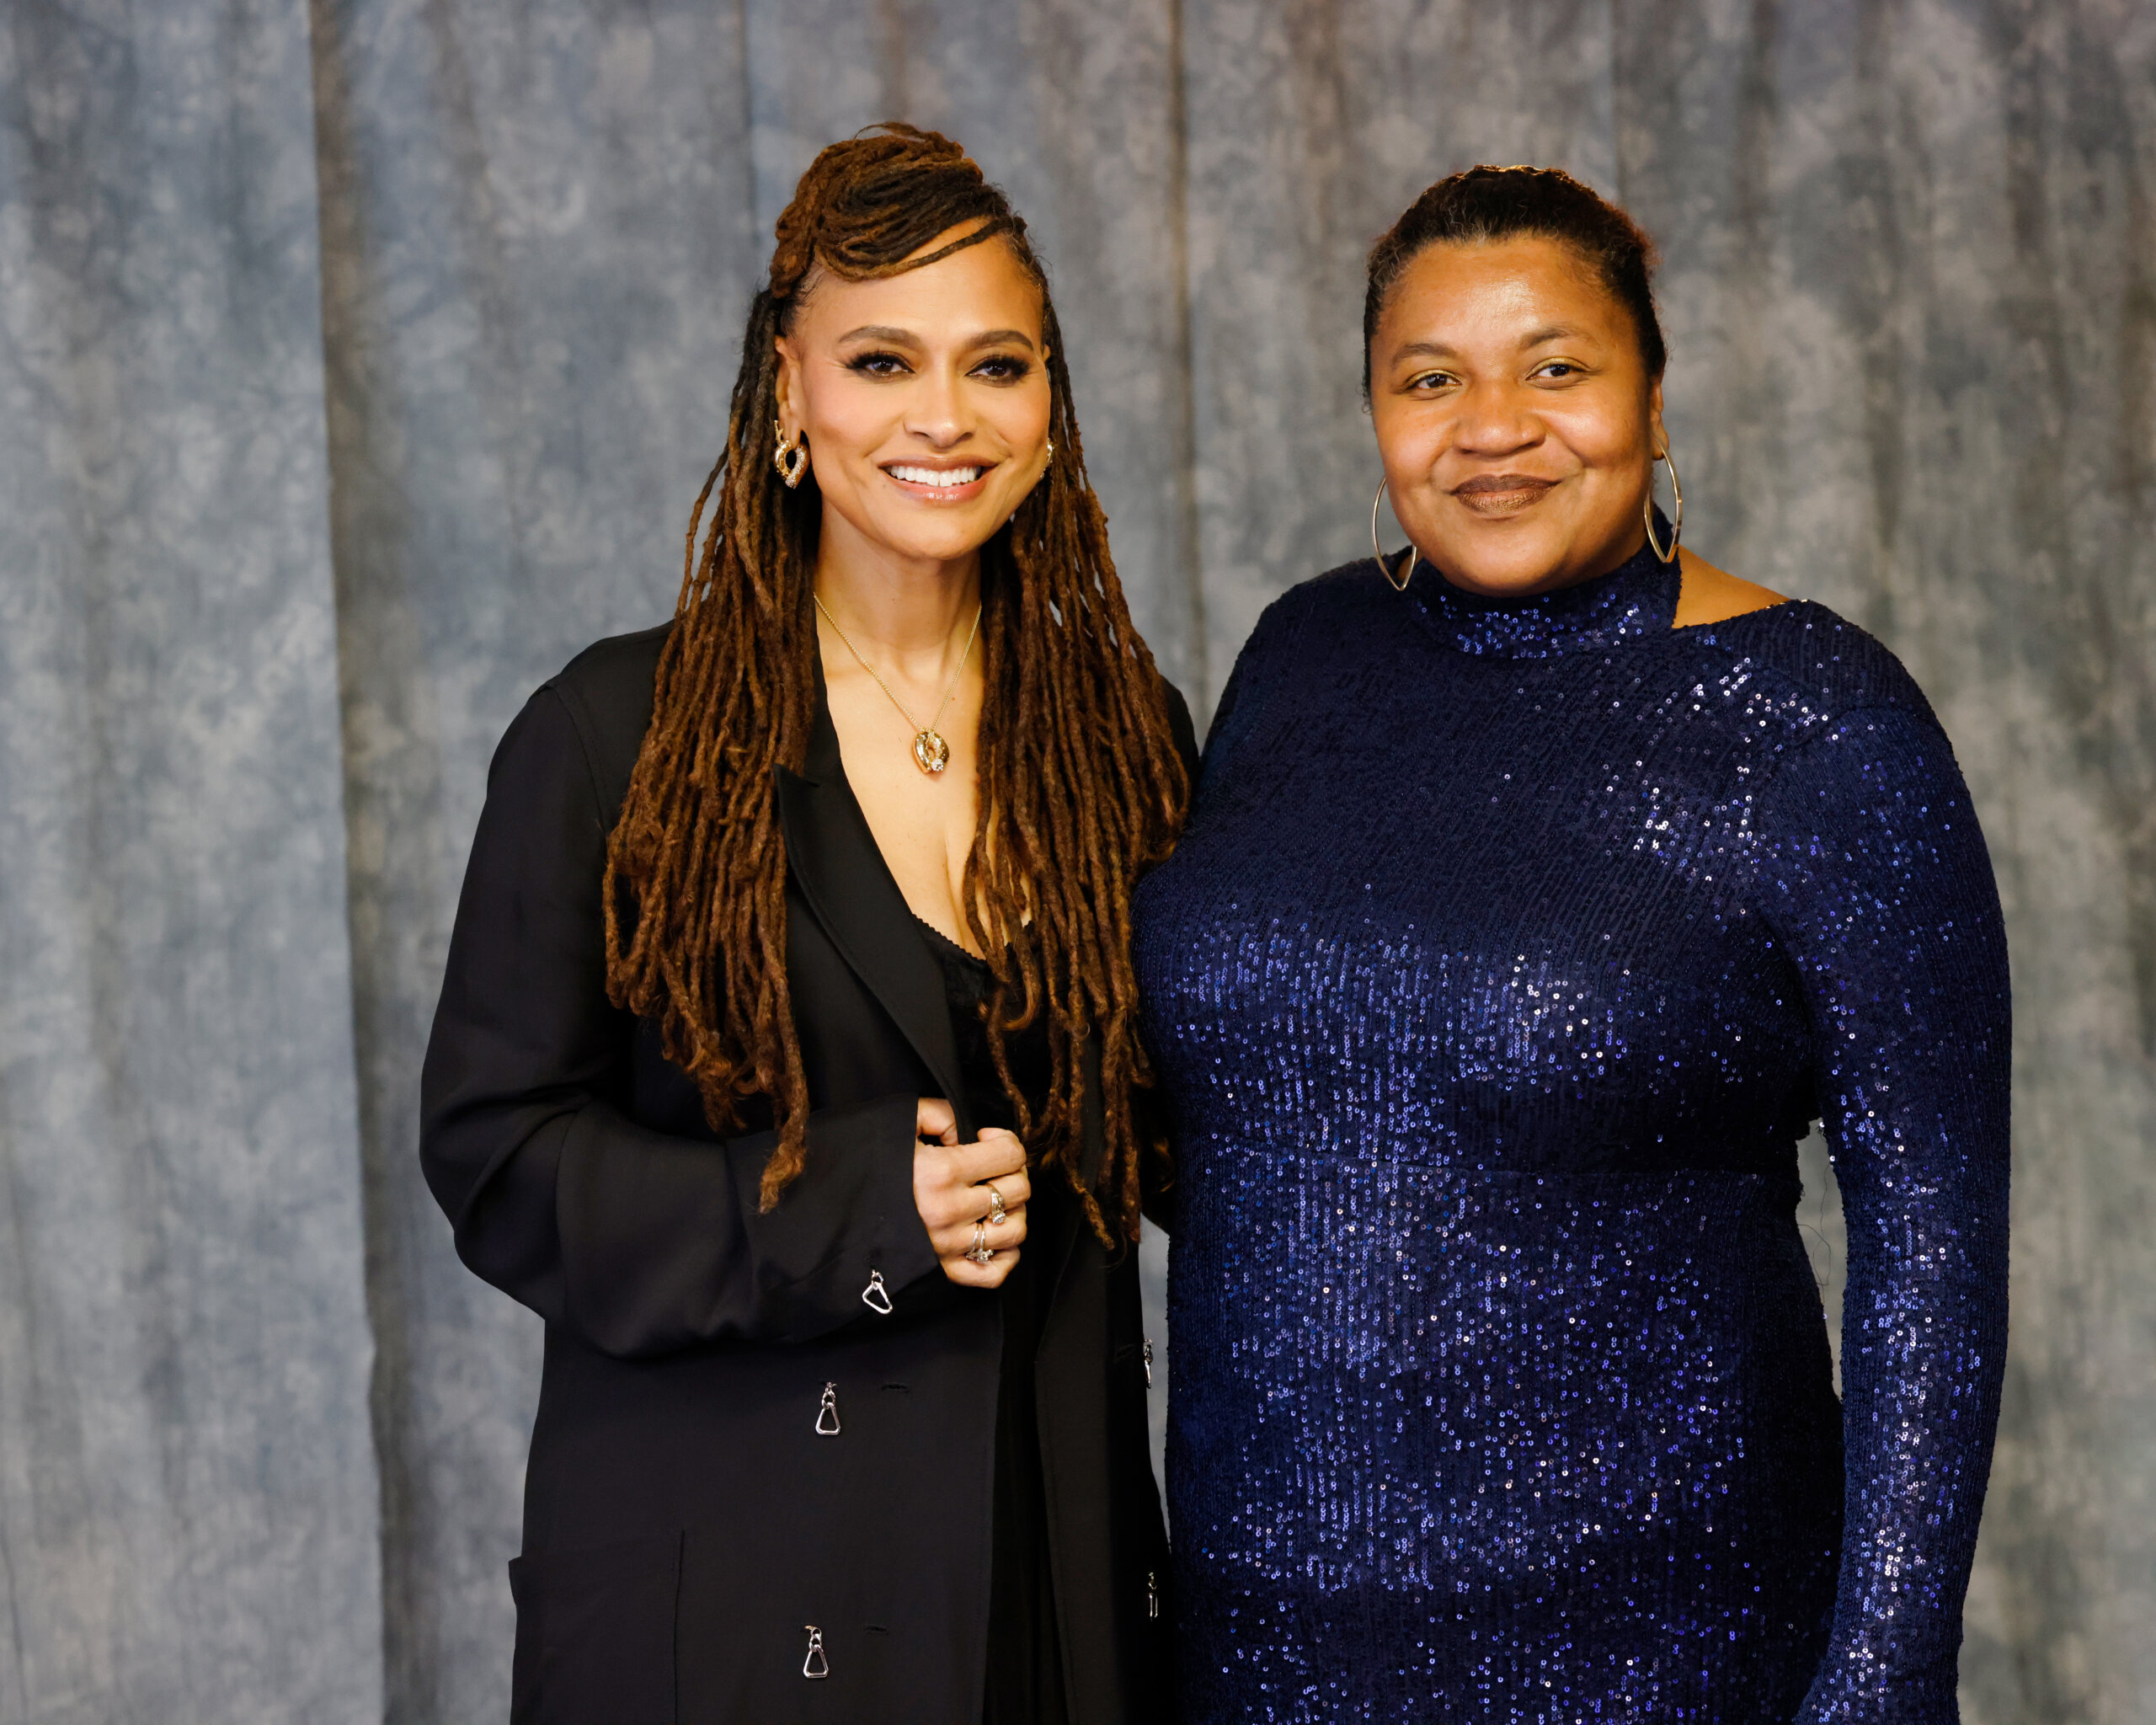 From left, Ava DuVernay and Destiny Lilly smiling.